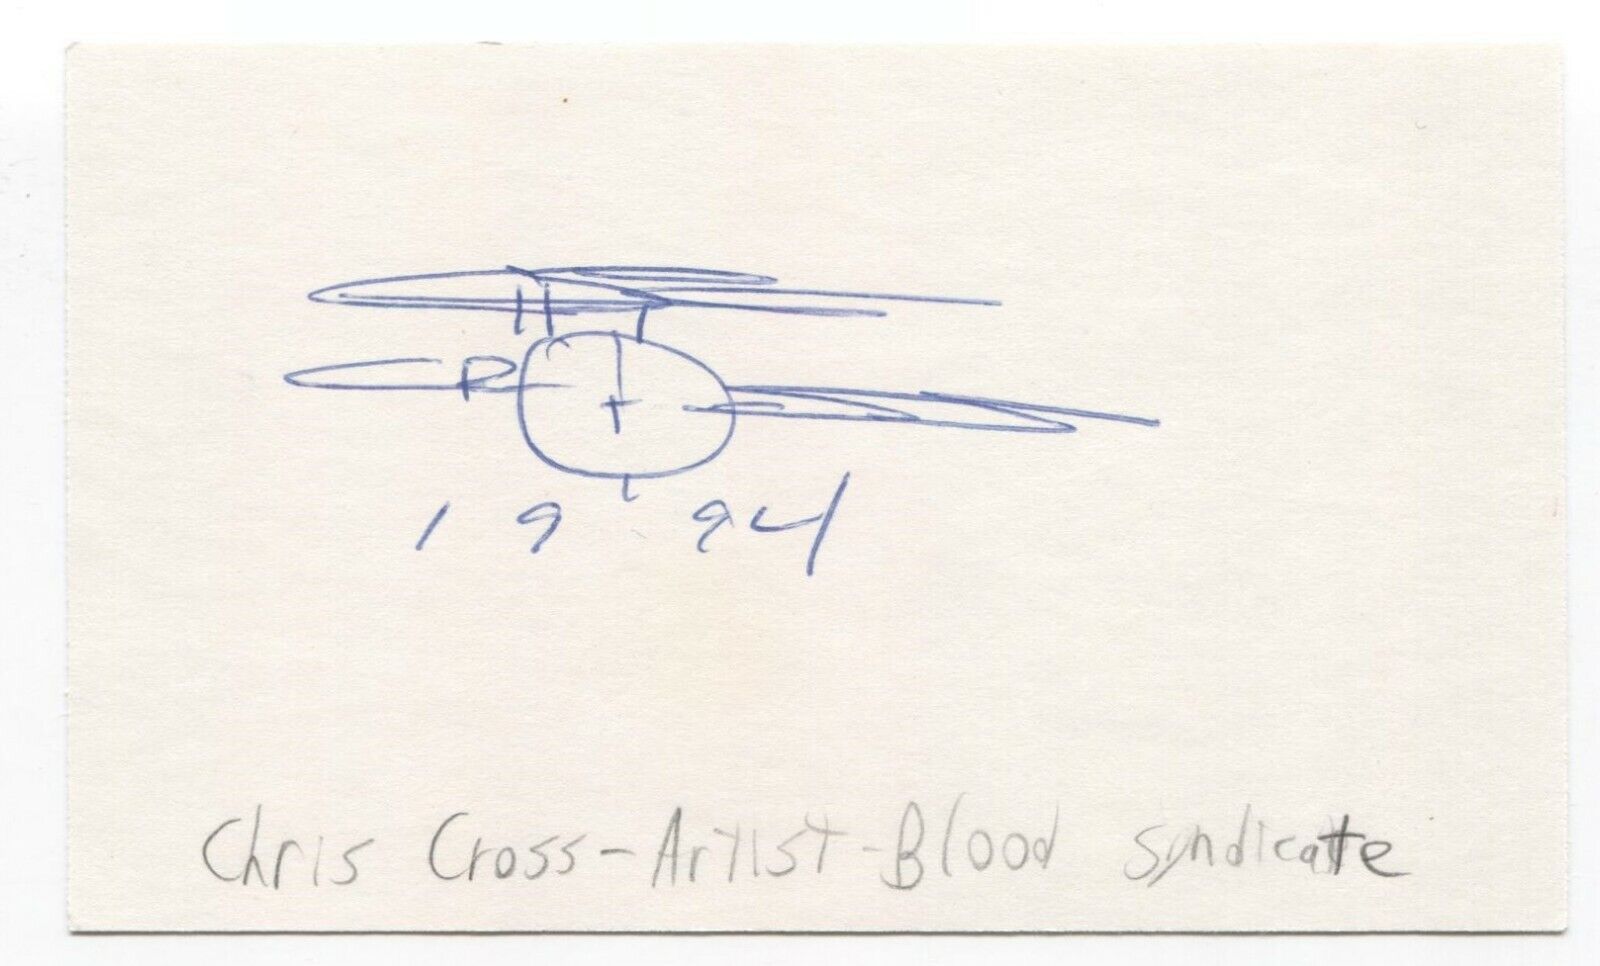 Chris Cross Signed Index Card Autograph Signature Comic Artist Blood Syndicate